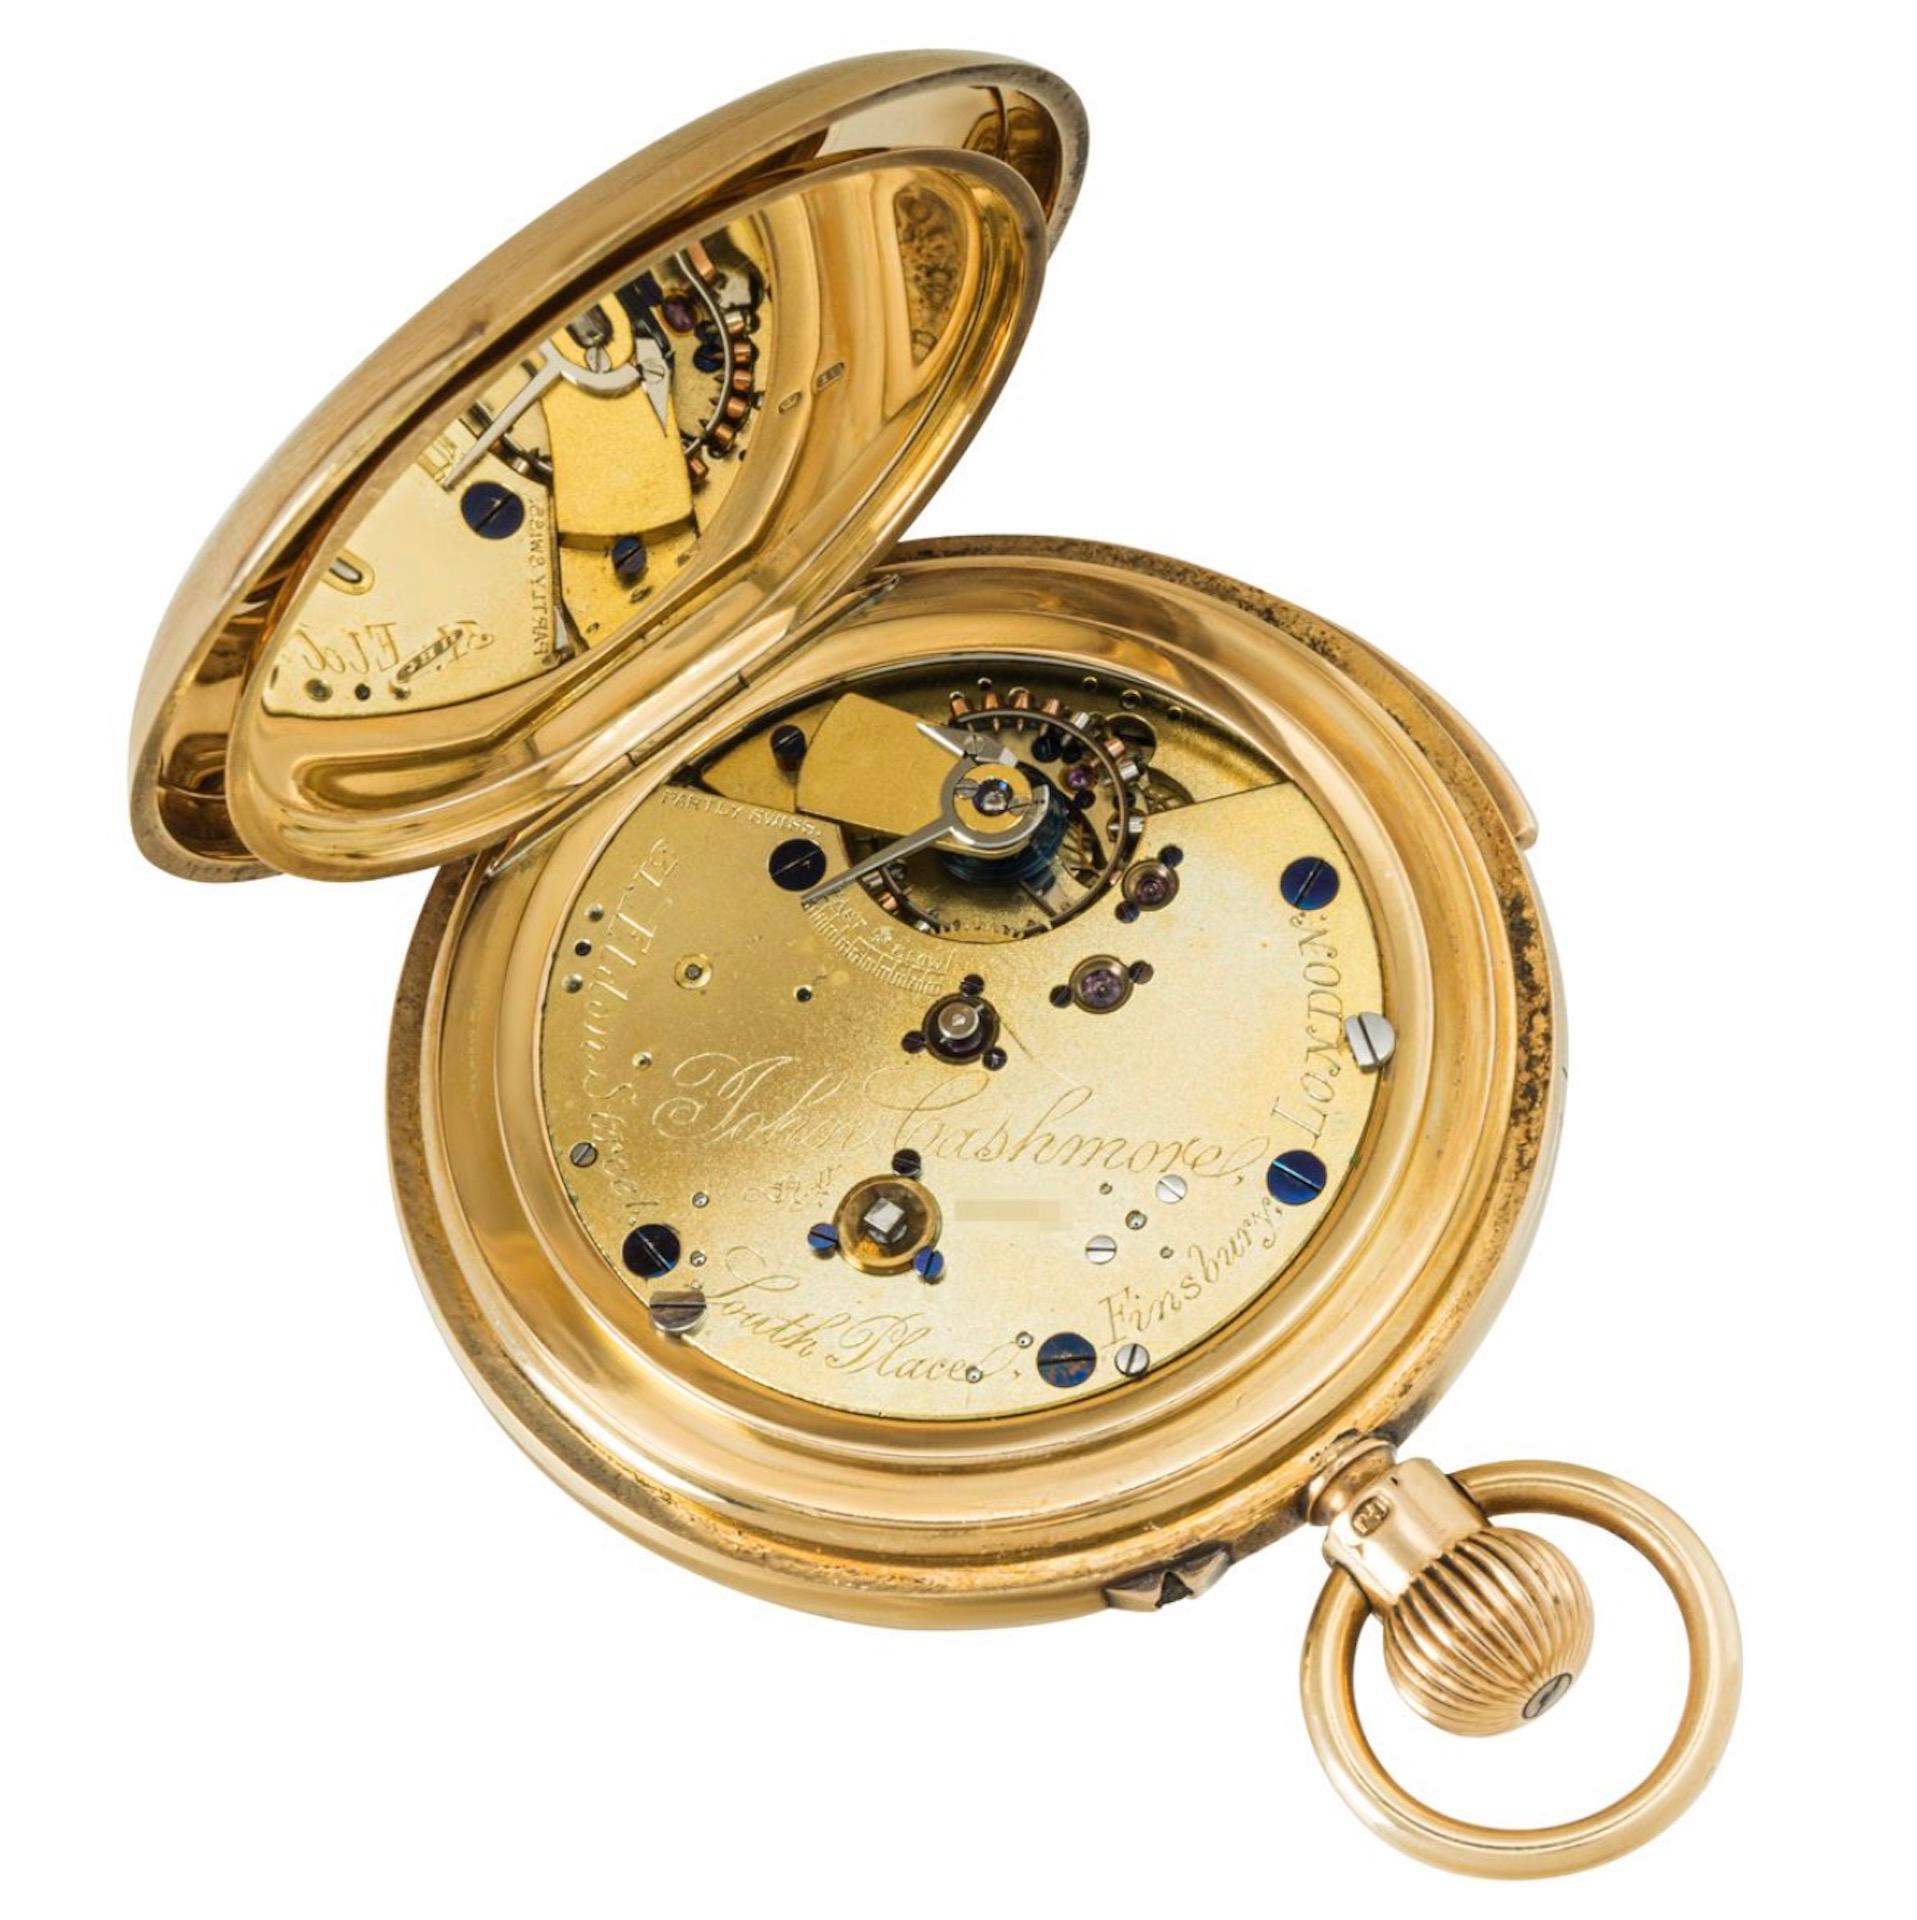 John Cashmore Yellow Gold Half Quarter Repeater Keyless Lever Pocket Watch C1893 In Excellent Condition For Sale In London, GB